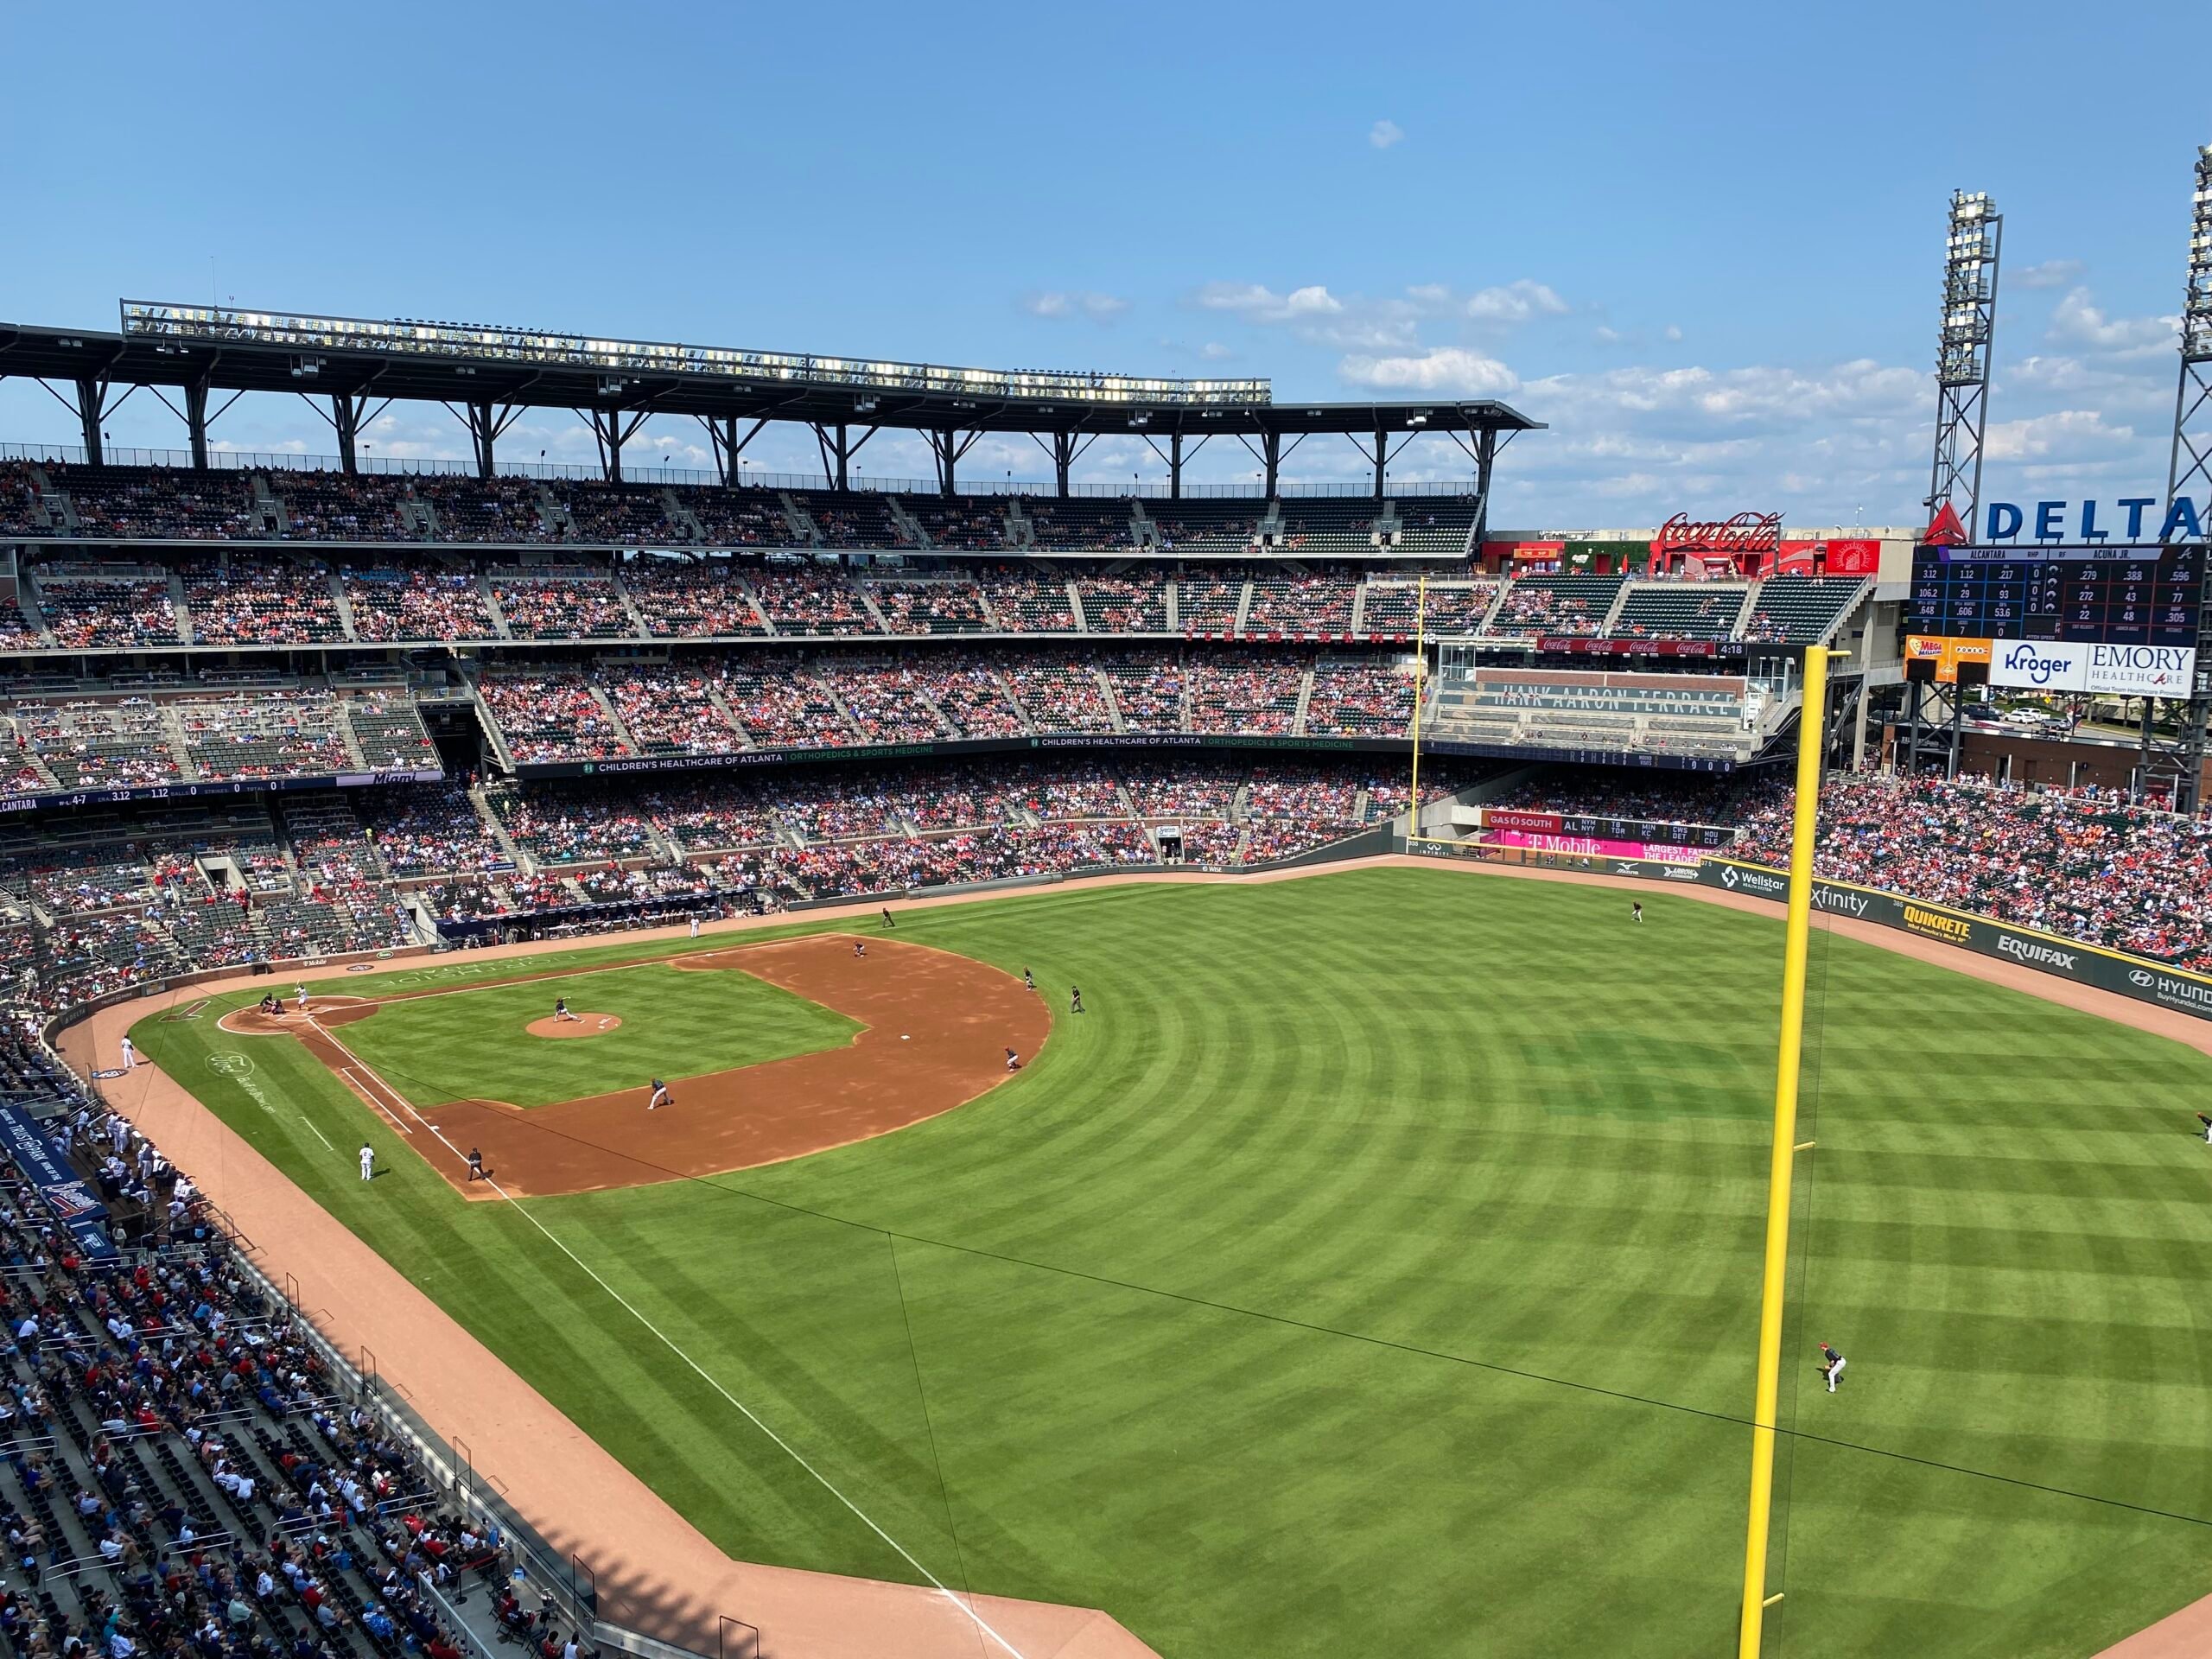 Truist Park, information and more of the Atlanta Braves ballpark